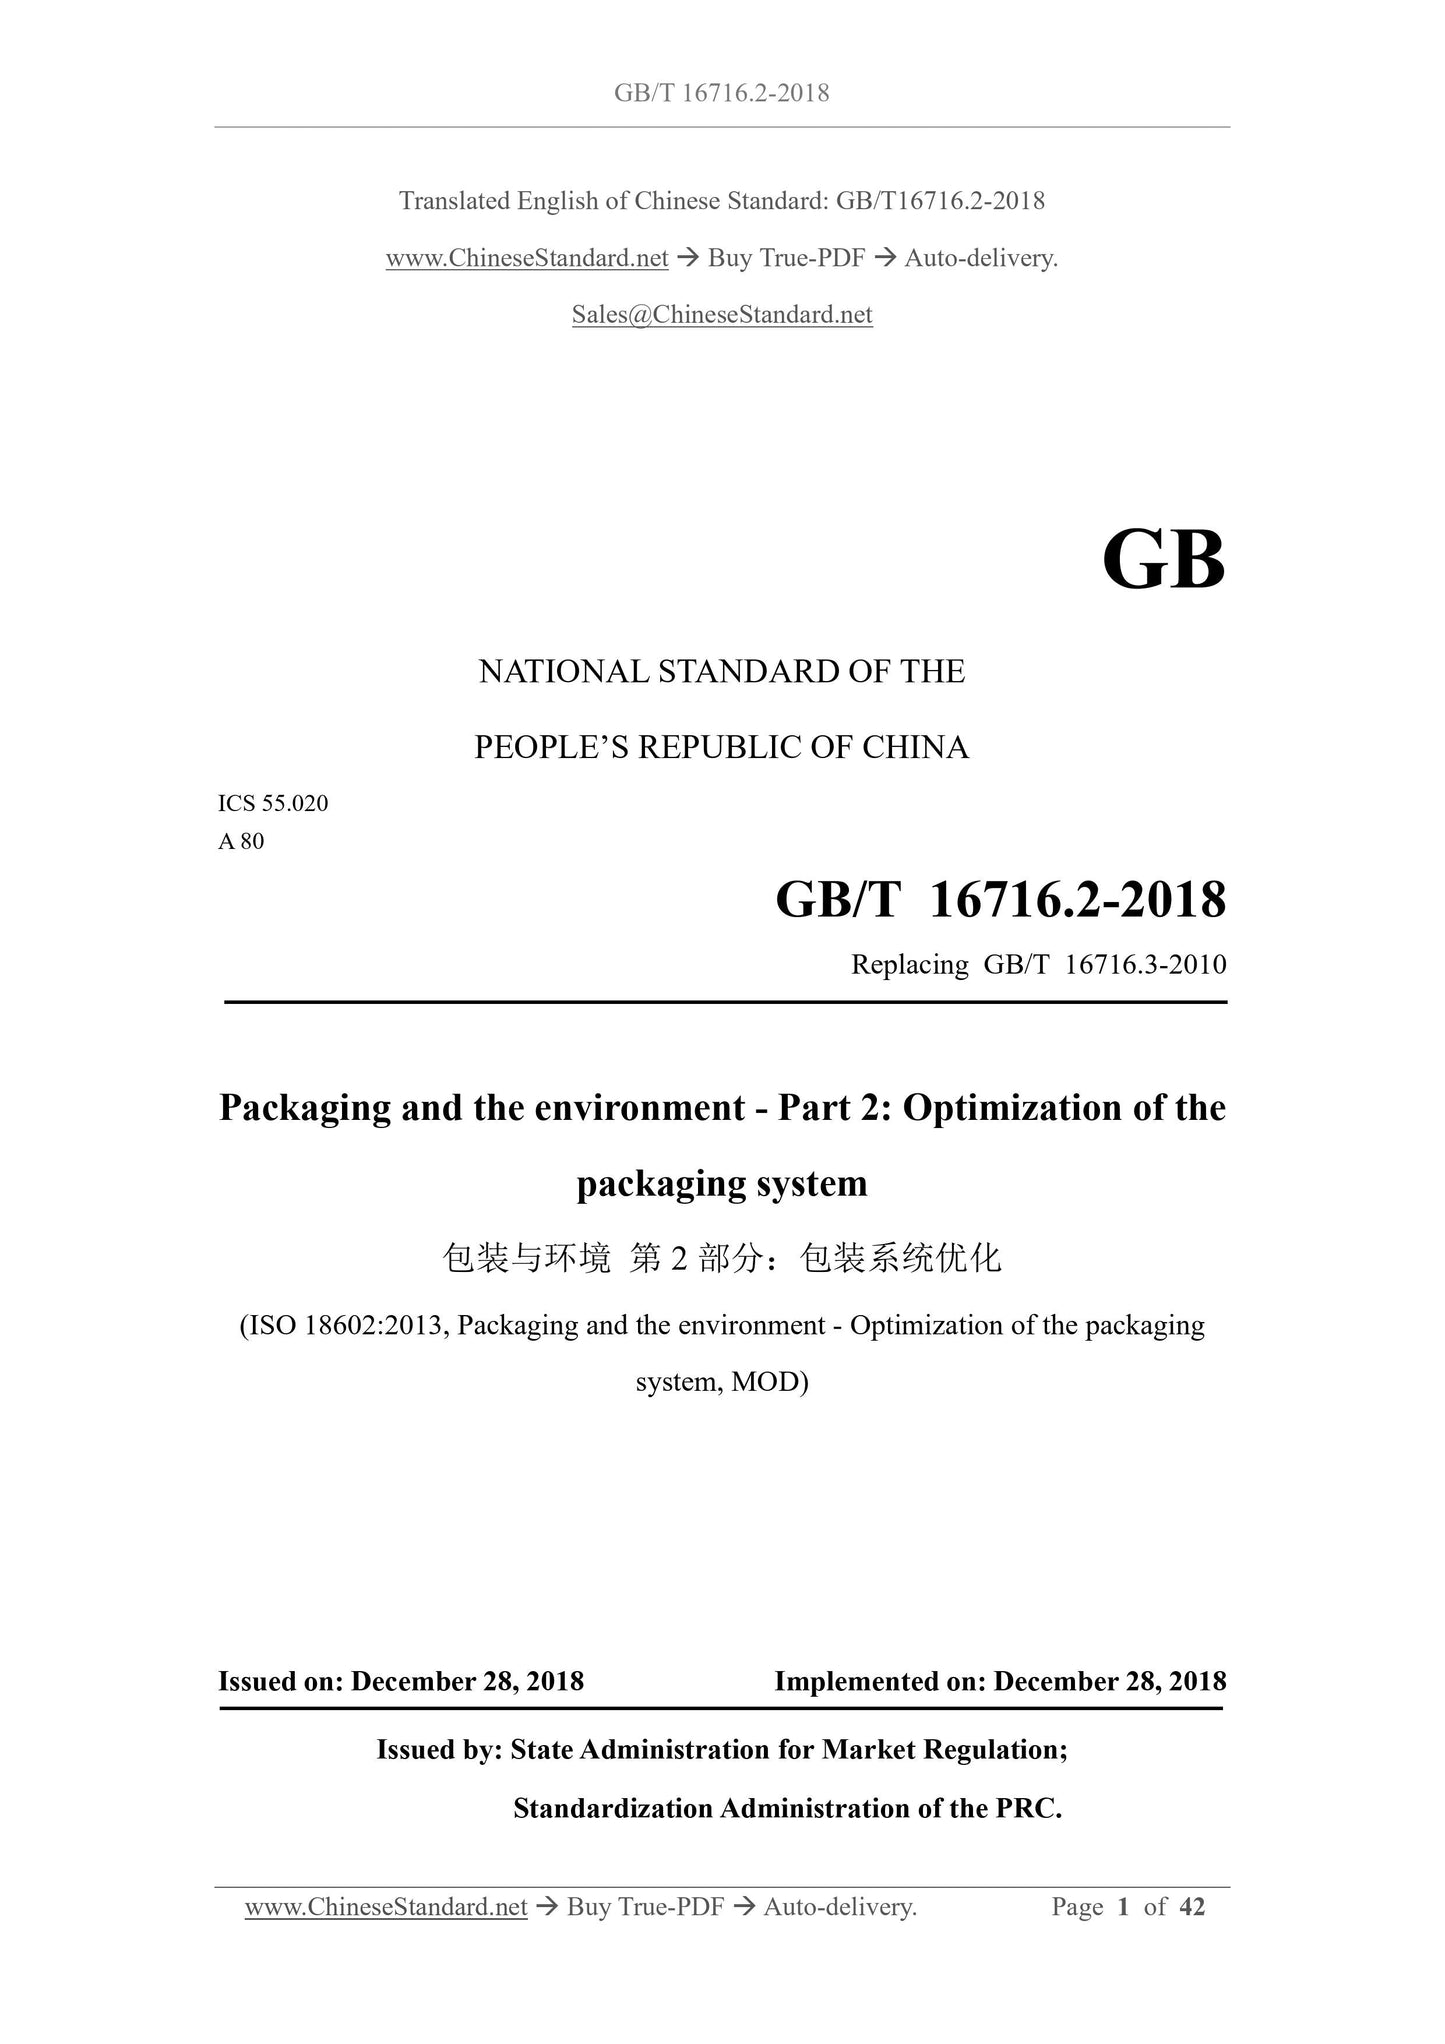 GB/T 16716.2-2018 Page 1